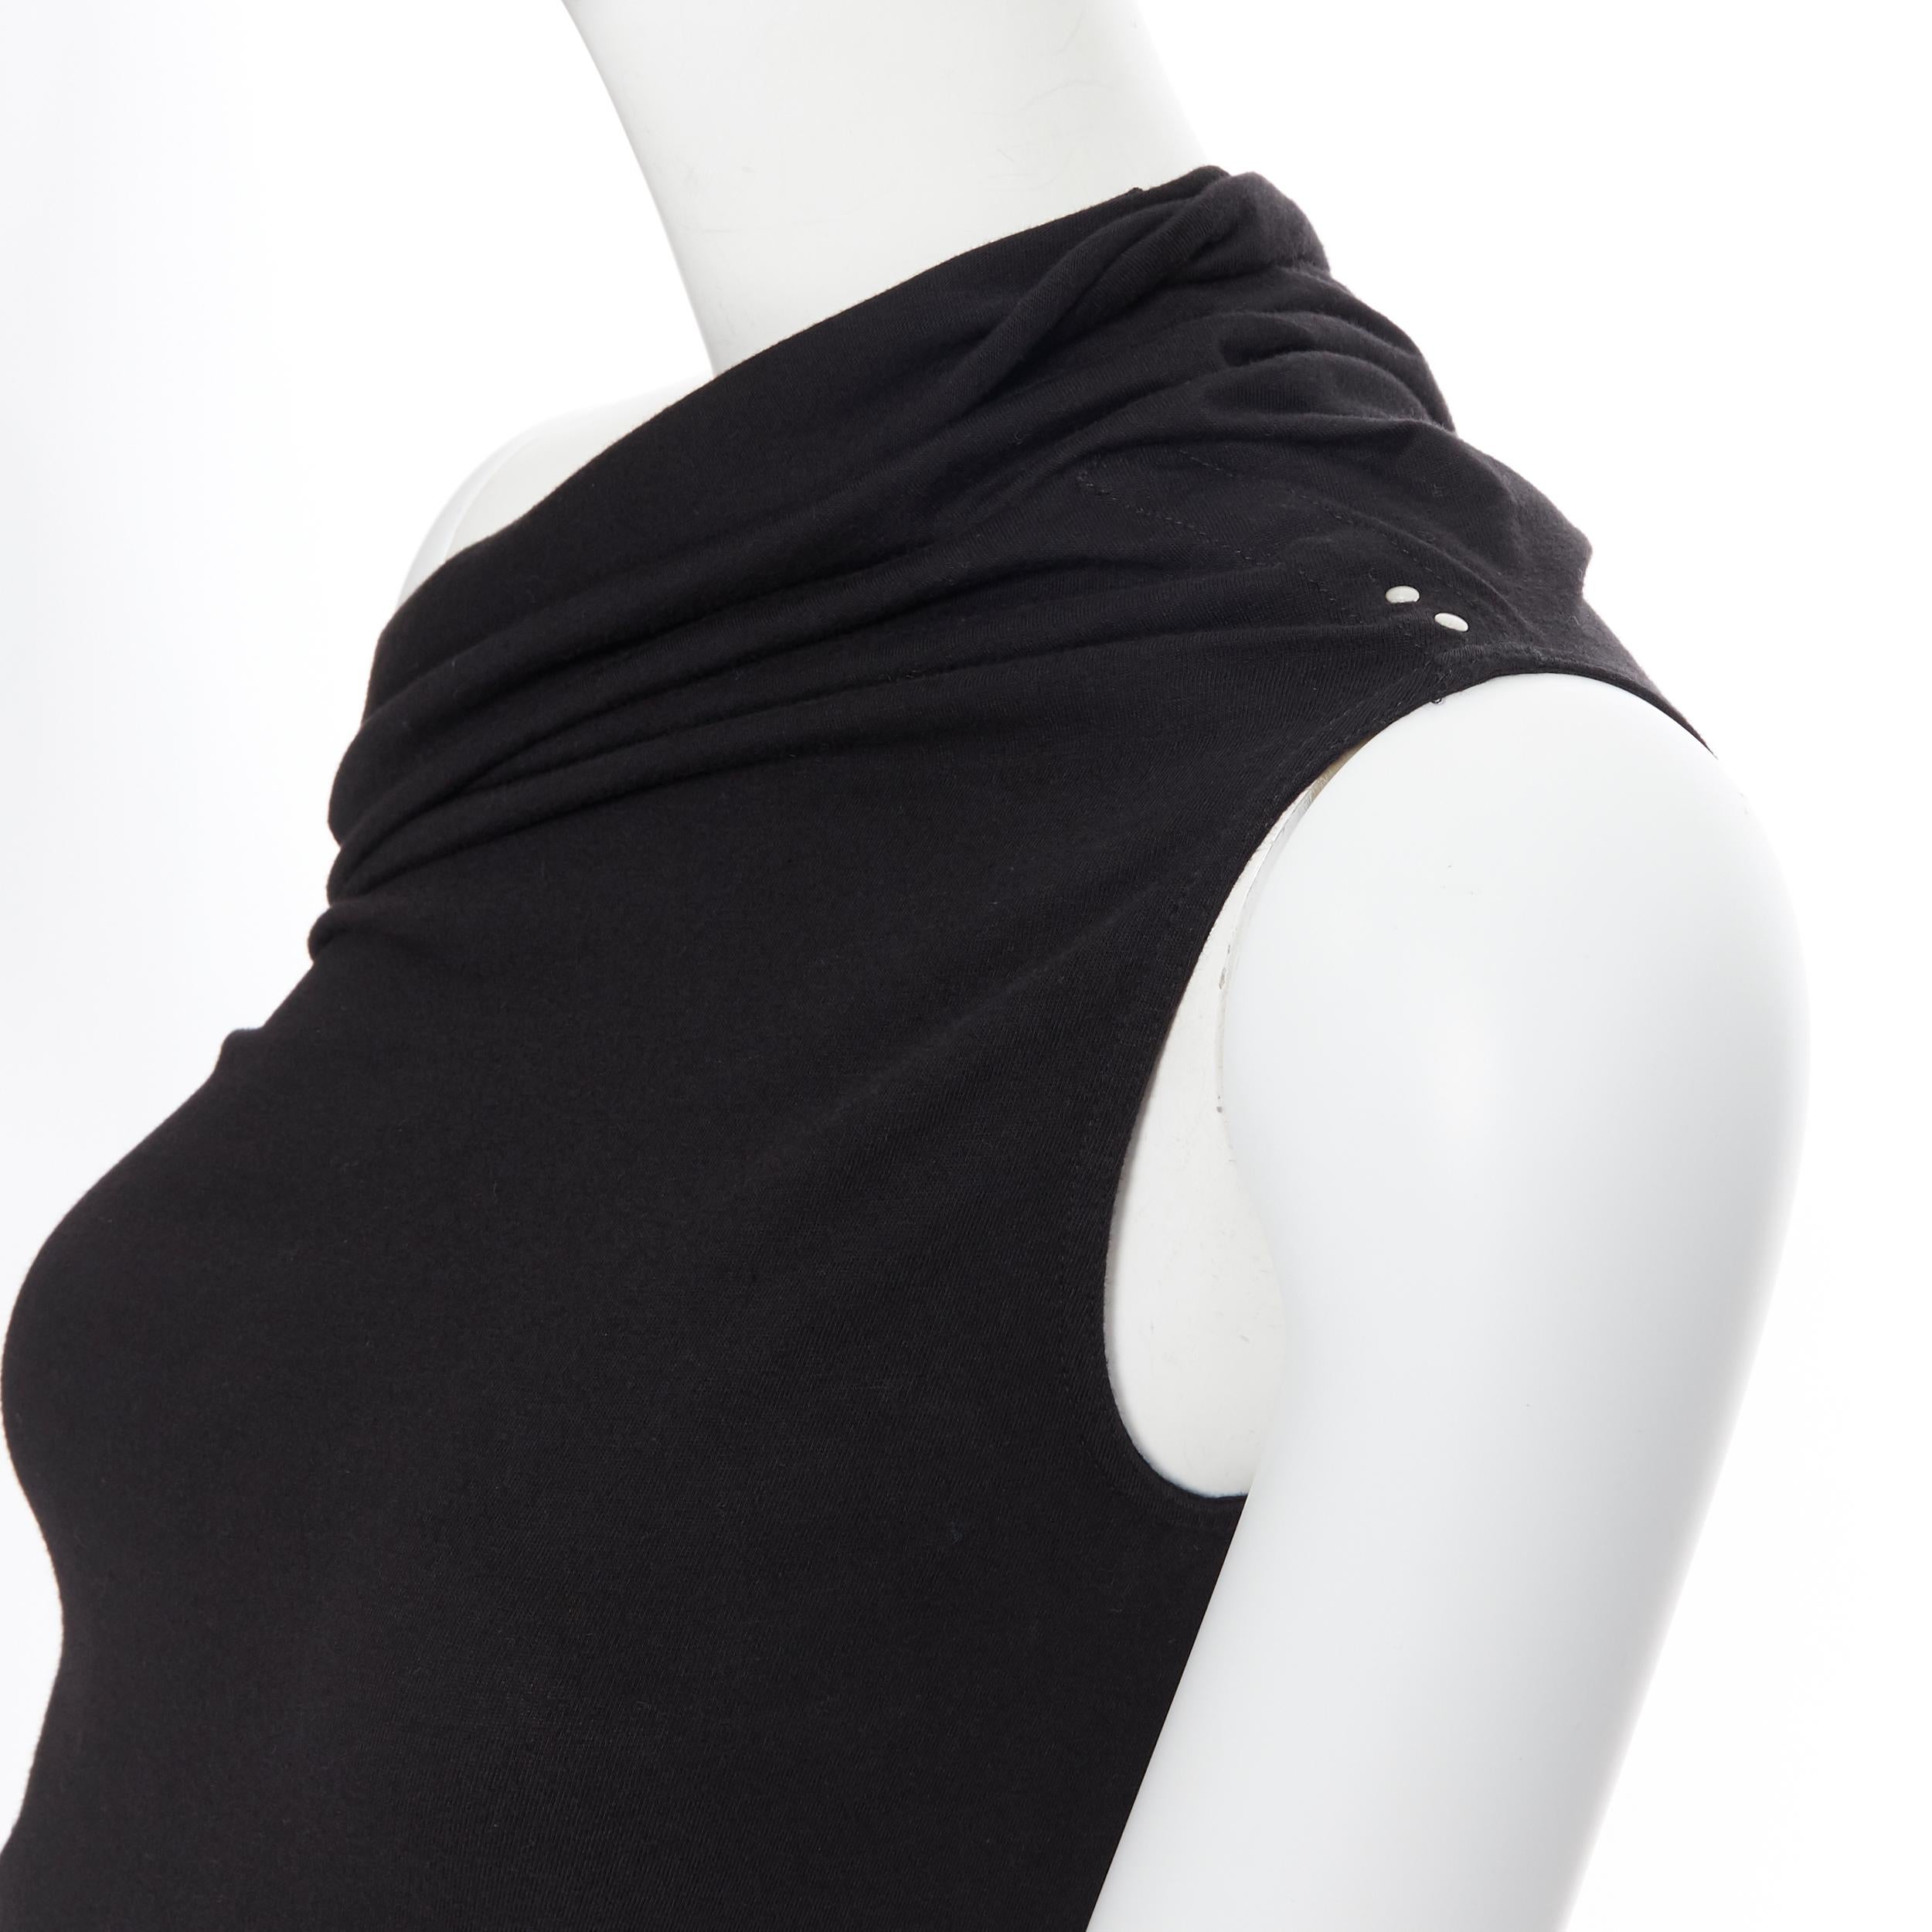 new RICK OWENS AW18 Sisyphus black cotton studded one shoulder top IT40 S
Brand: Rick Owens
Designer: Rick Owens
Collection: Fall Winter 2018
Model Name / Style: One shoulder top
Material: Cotton
Color: Black
Pattern: Solid
Extra Detail: Stretch fit